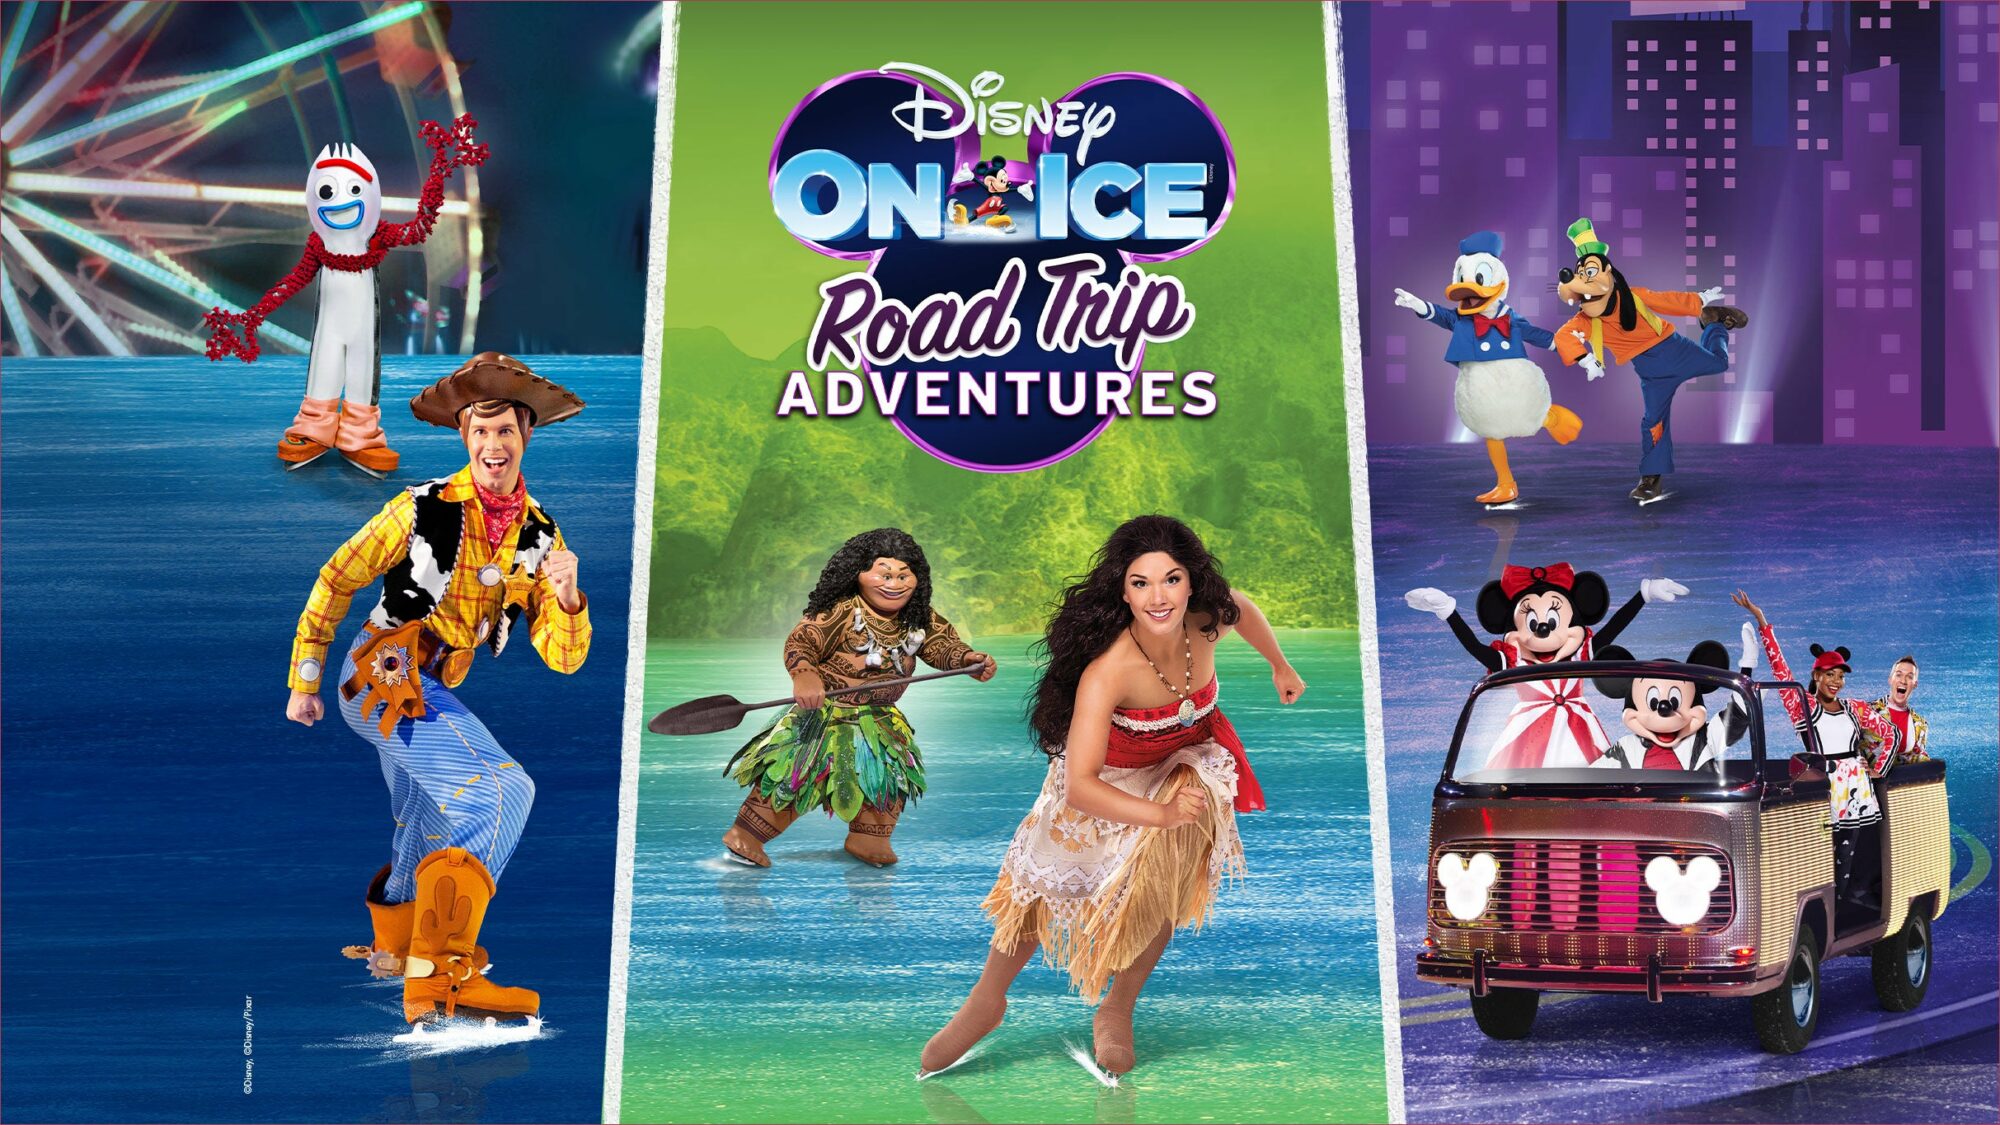 Image name Disney On Ice presents Road Trip Adventures at Utilita Arena Sheffield Sheffield the 2 image from the post Events in Yorkshire.com.